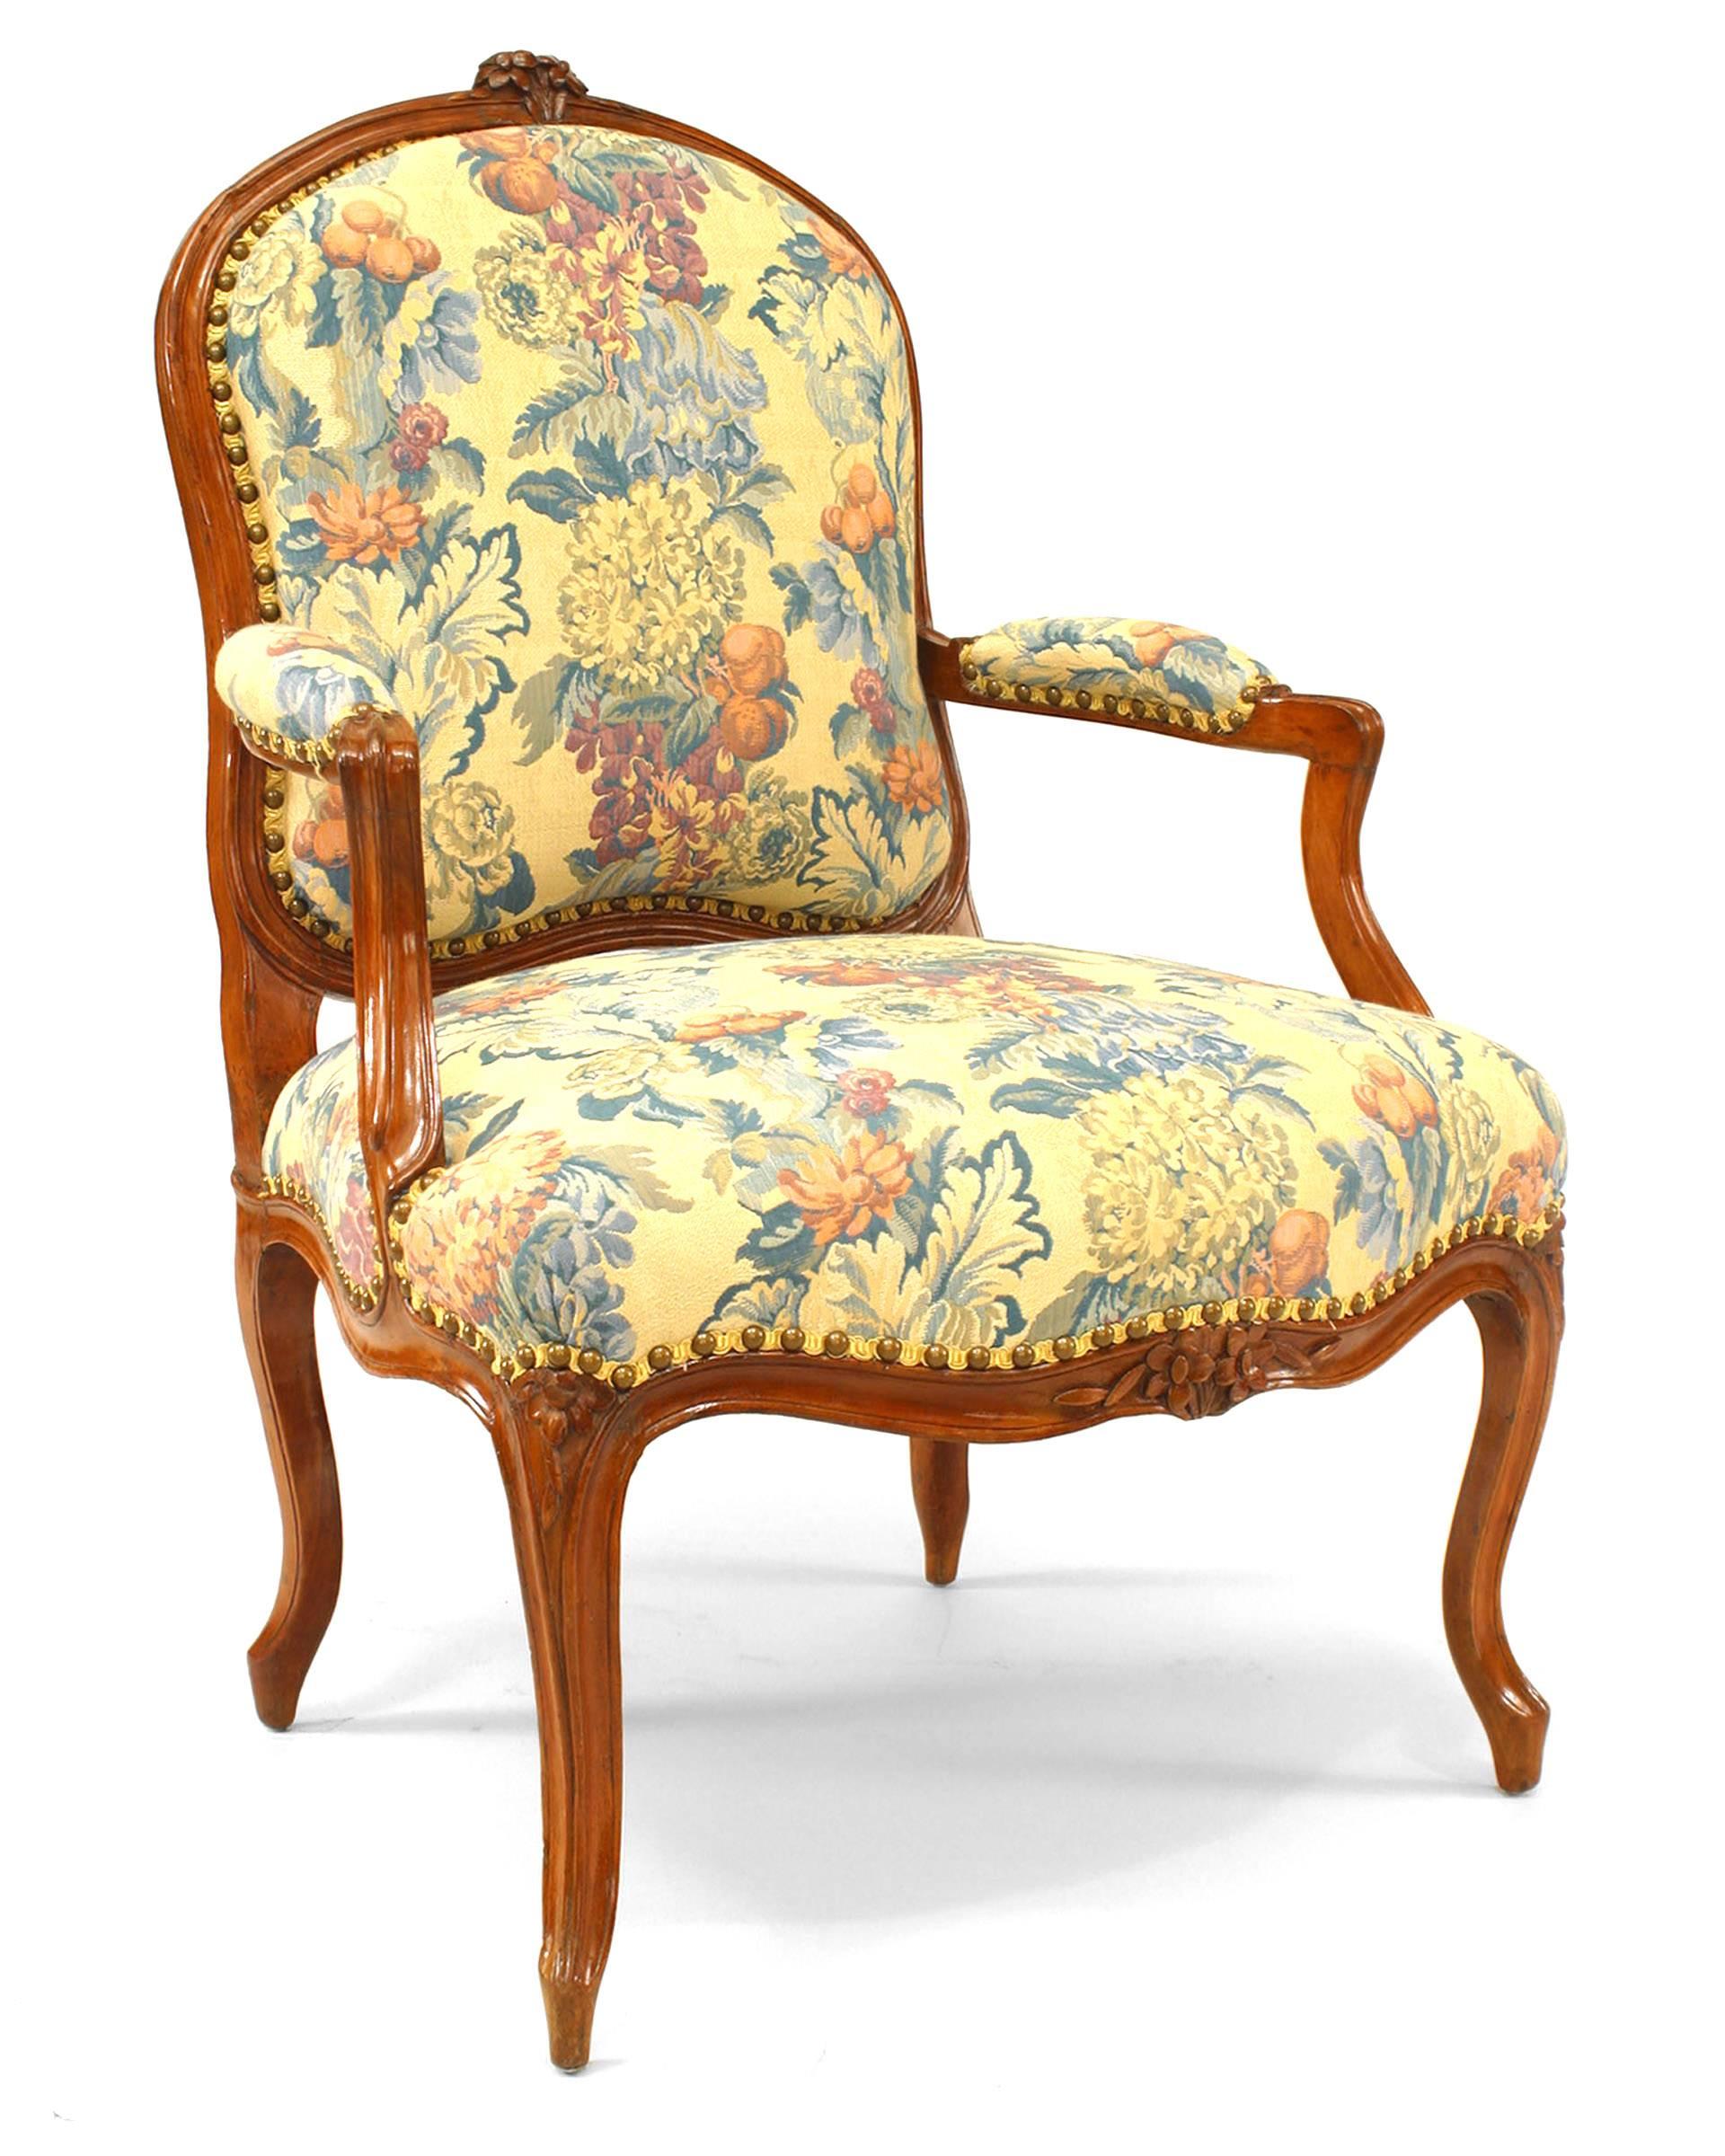 Pair of French Provincial Louis XV open Armchairs with carved floral crest on top of back frame with floral upholstered seat, back and arm rests
